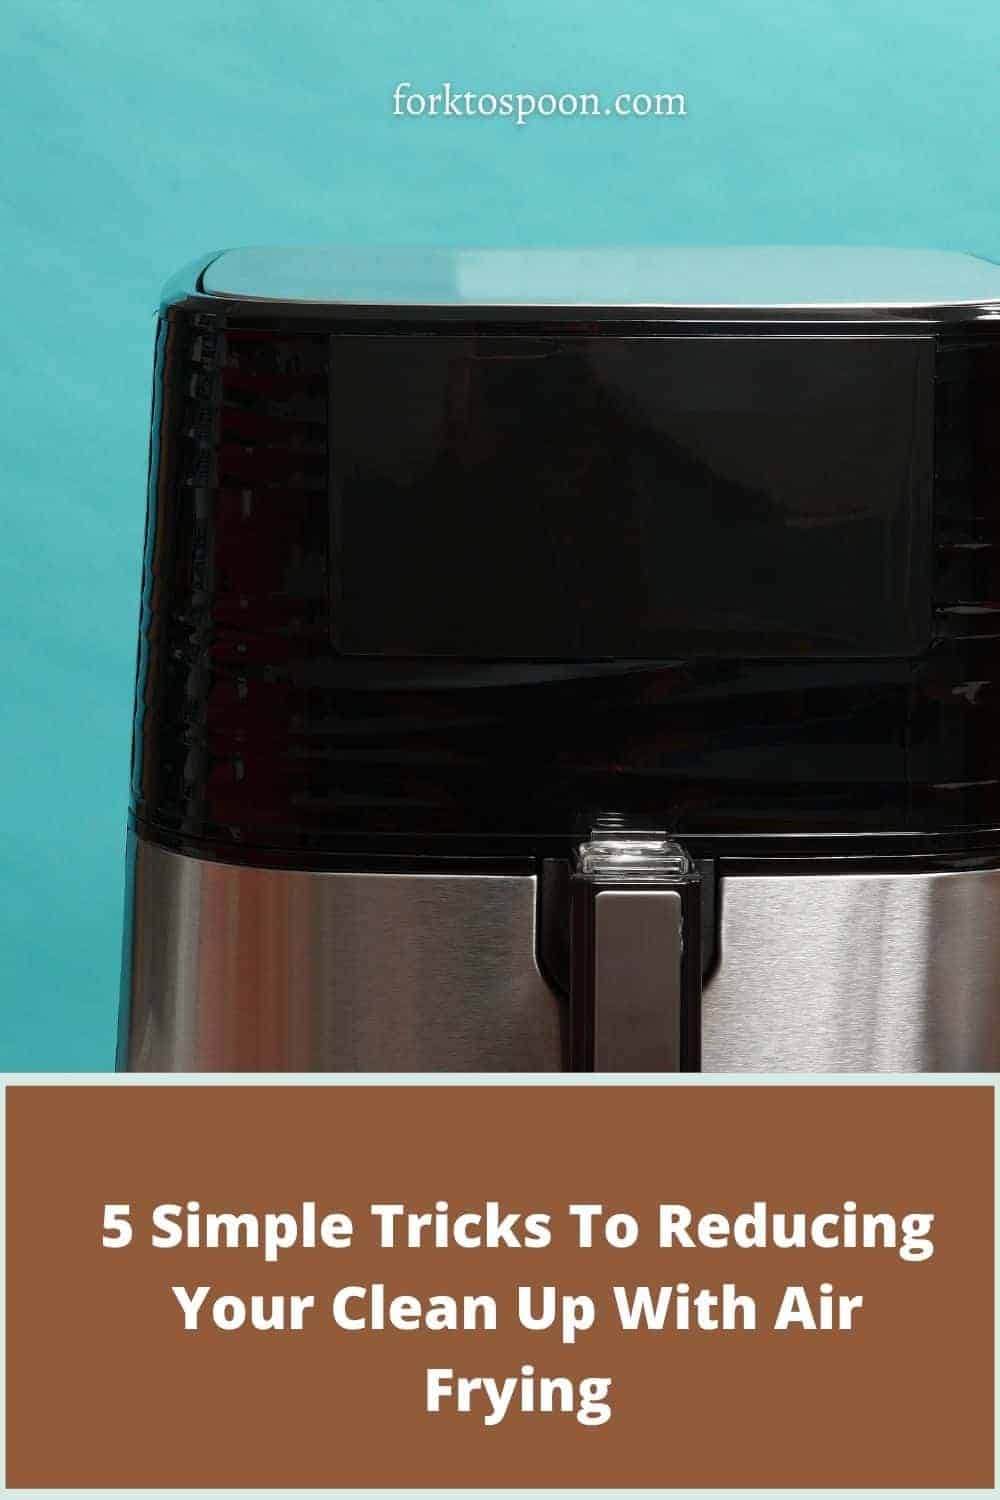 How To Clean Air Fryer- 5 Easy Tips - NDTV Food